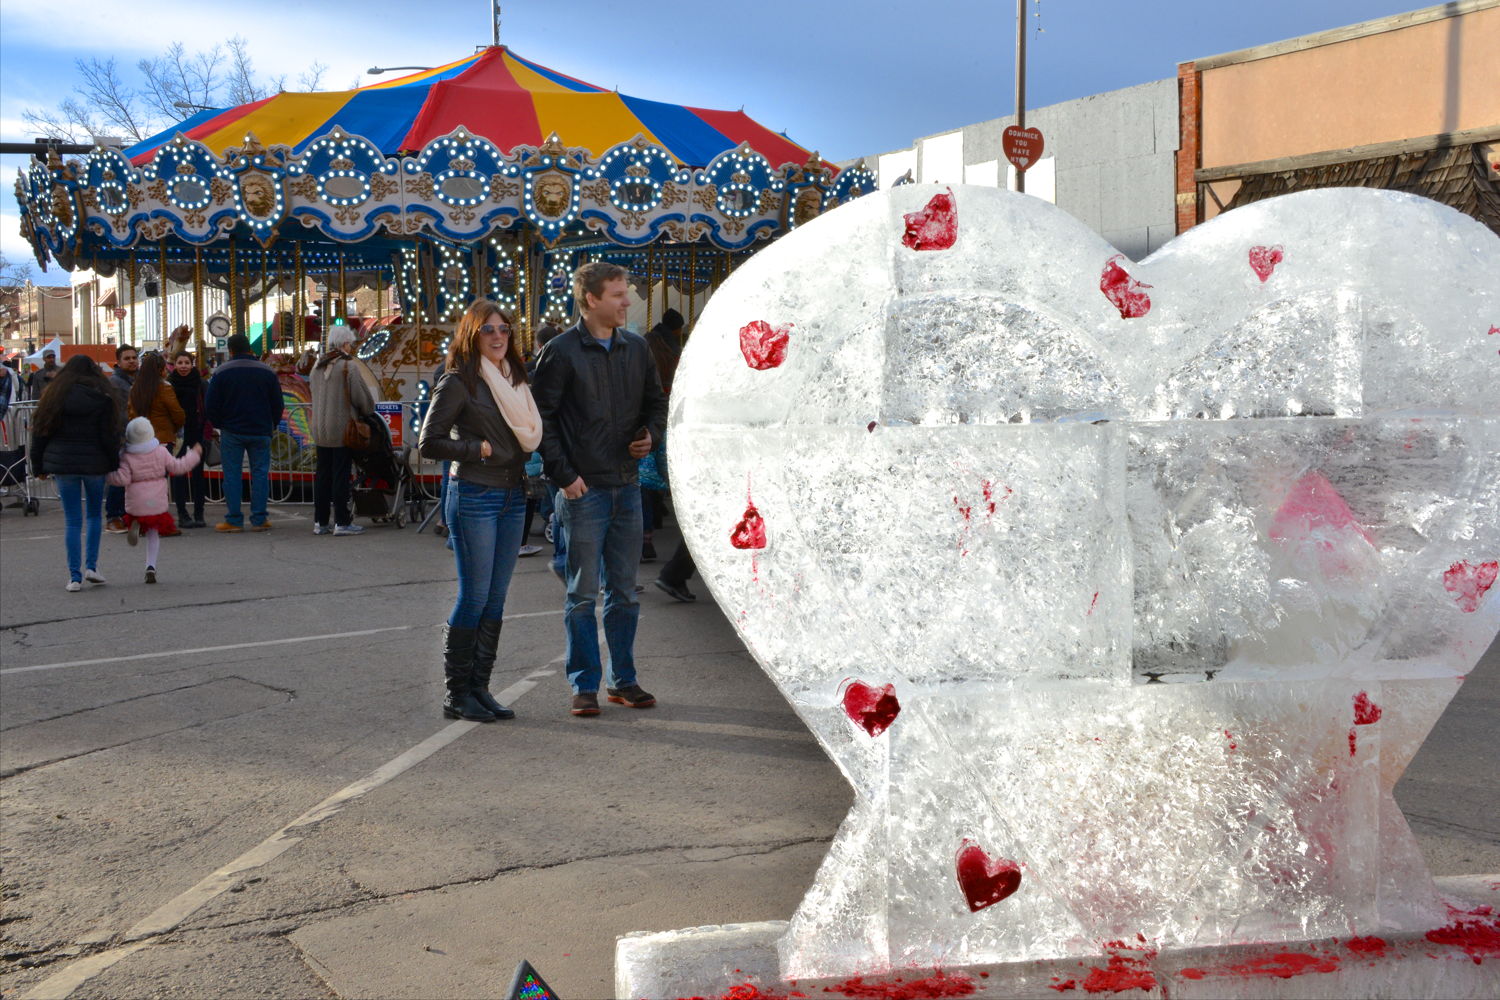 Loveland Fire & Ice Festival - Ice sculpture and carousel
